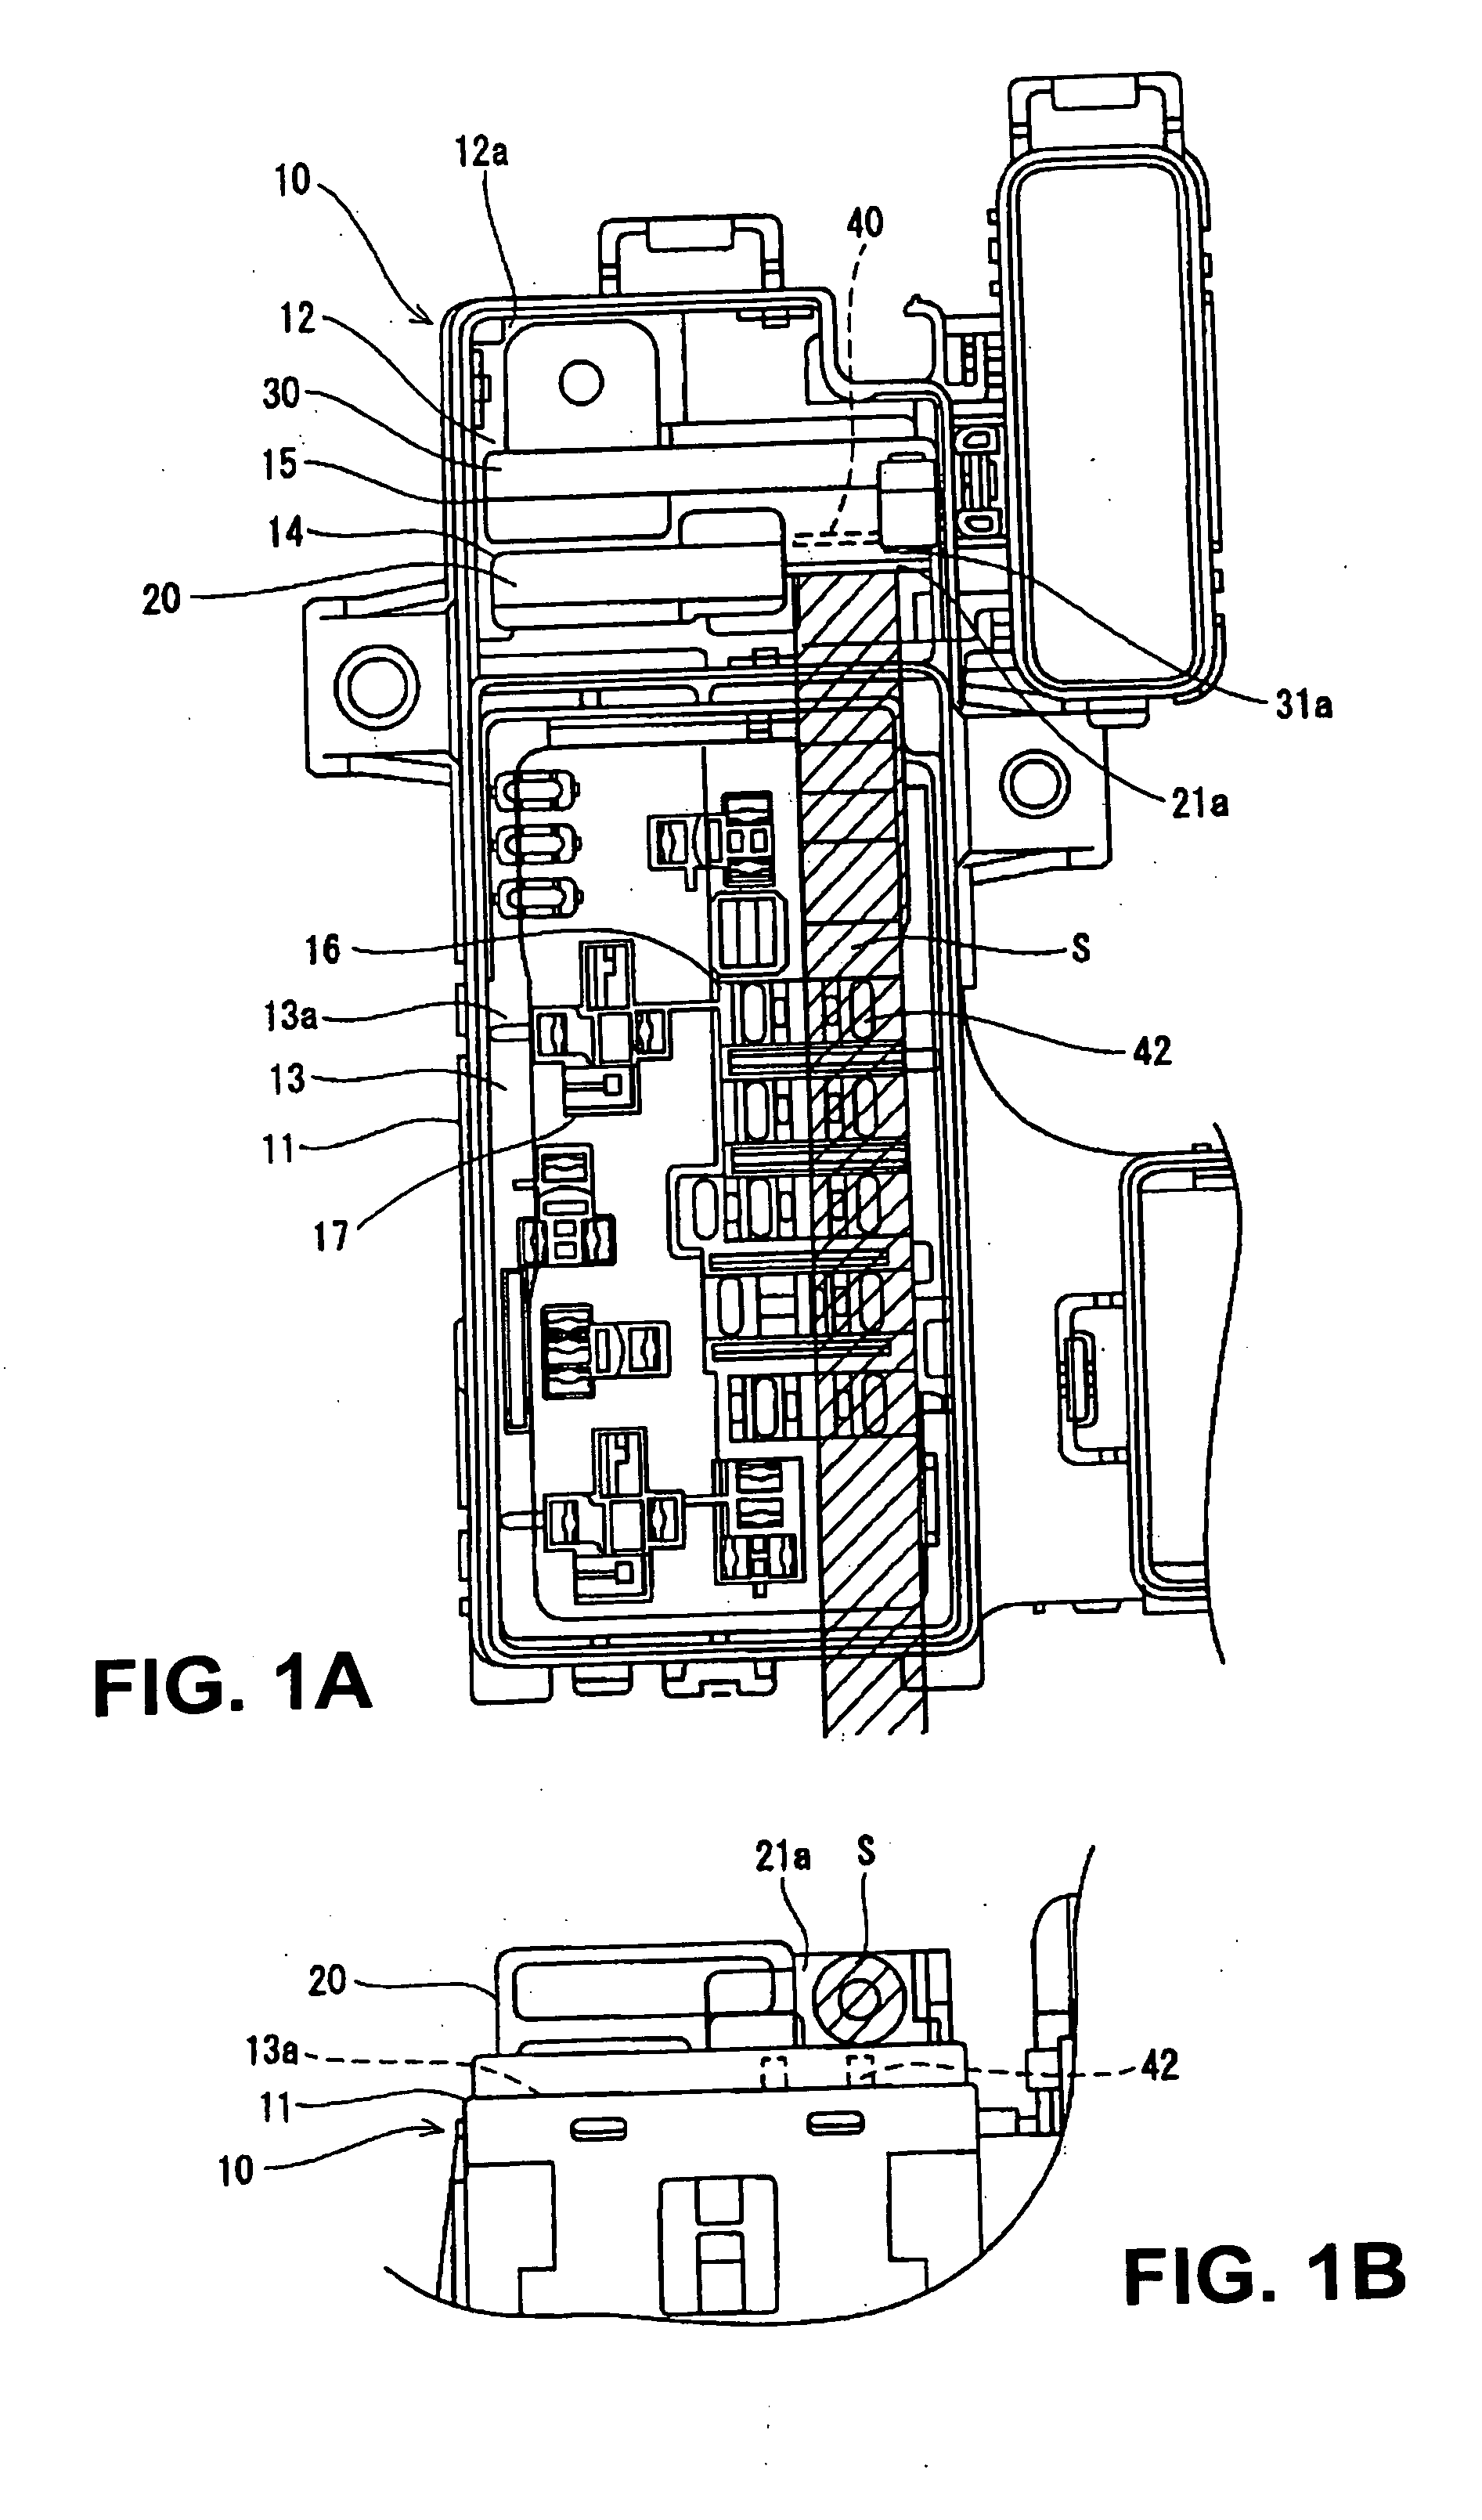 Electrical junction box